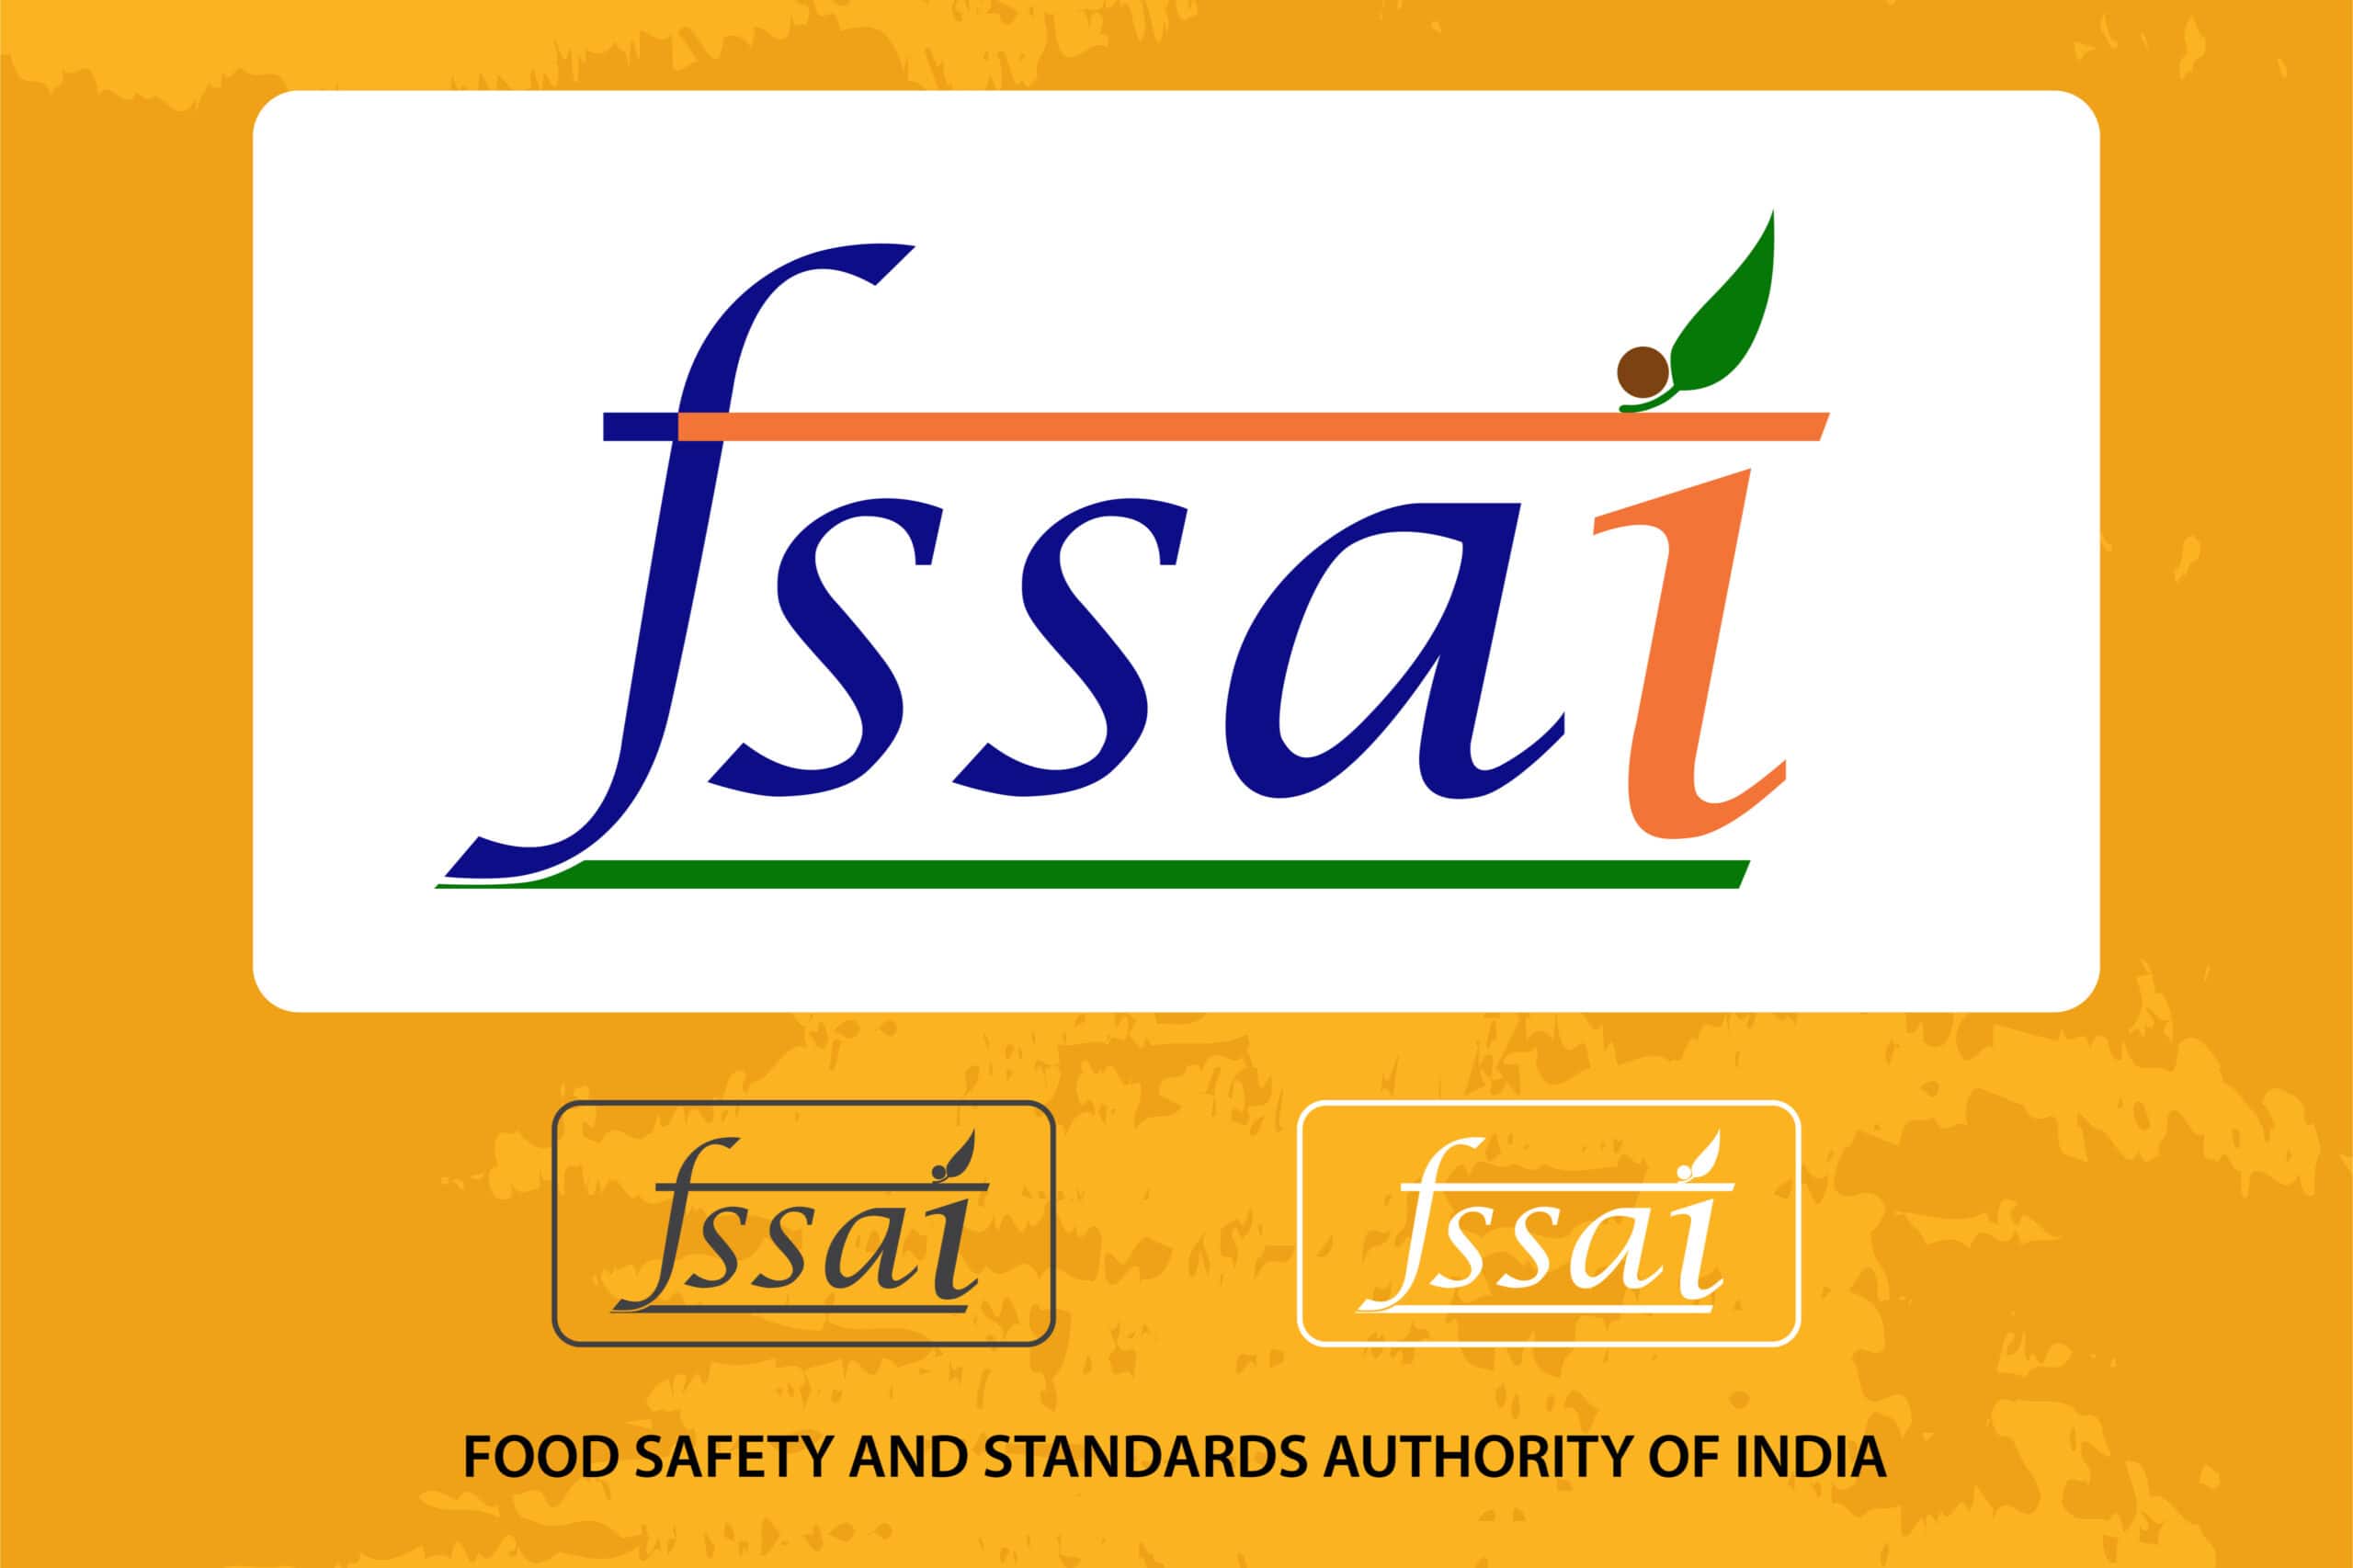 FSSAI has developed a pan-India surveillance system to collect data regarding safety and quality of food